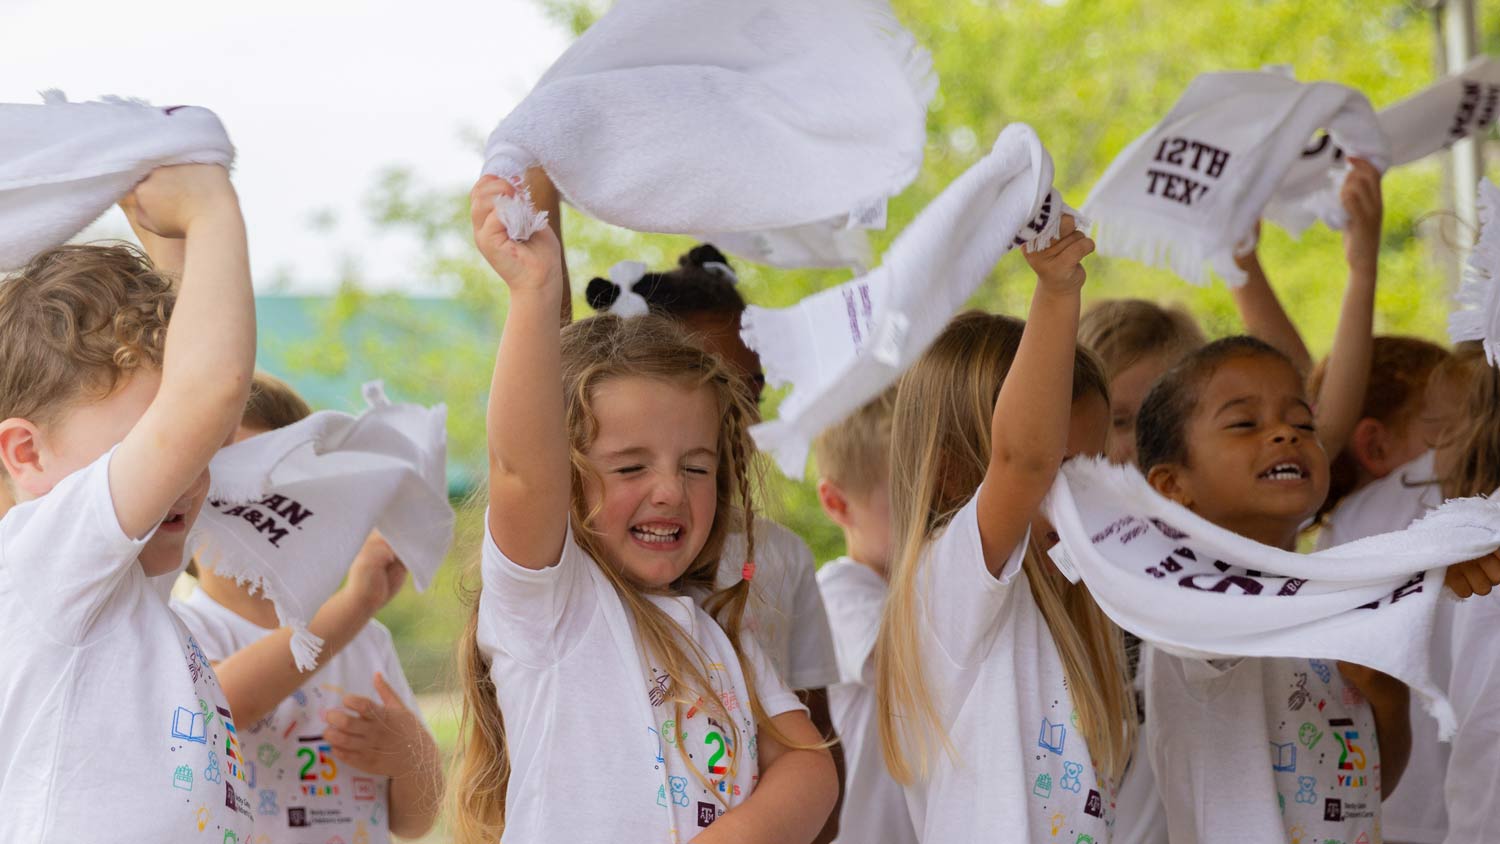 A group of pre-k student wave 12th man towels at a children's event